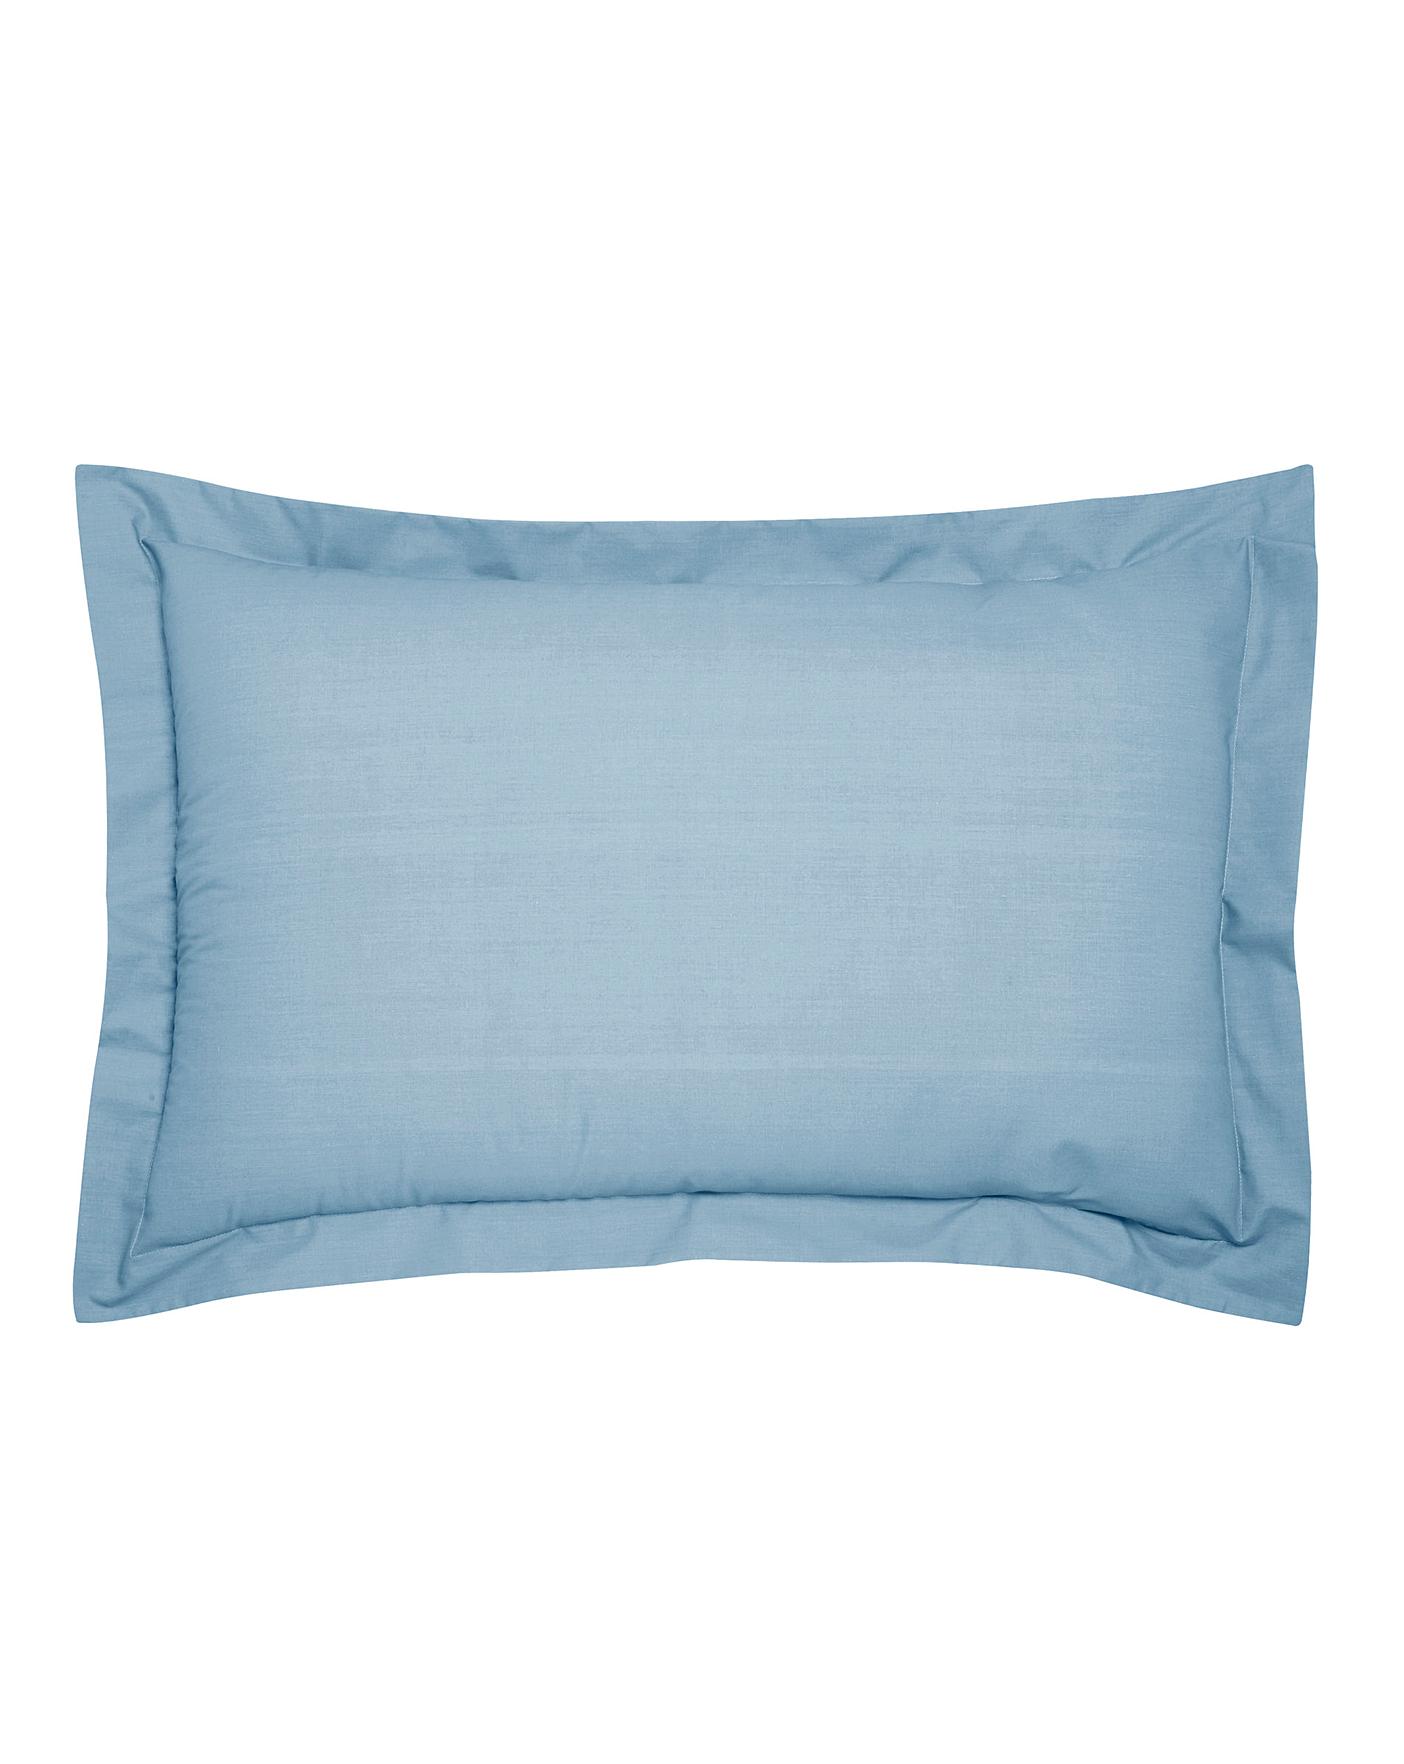 Plain Pair of  Pillow Cases High Quality